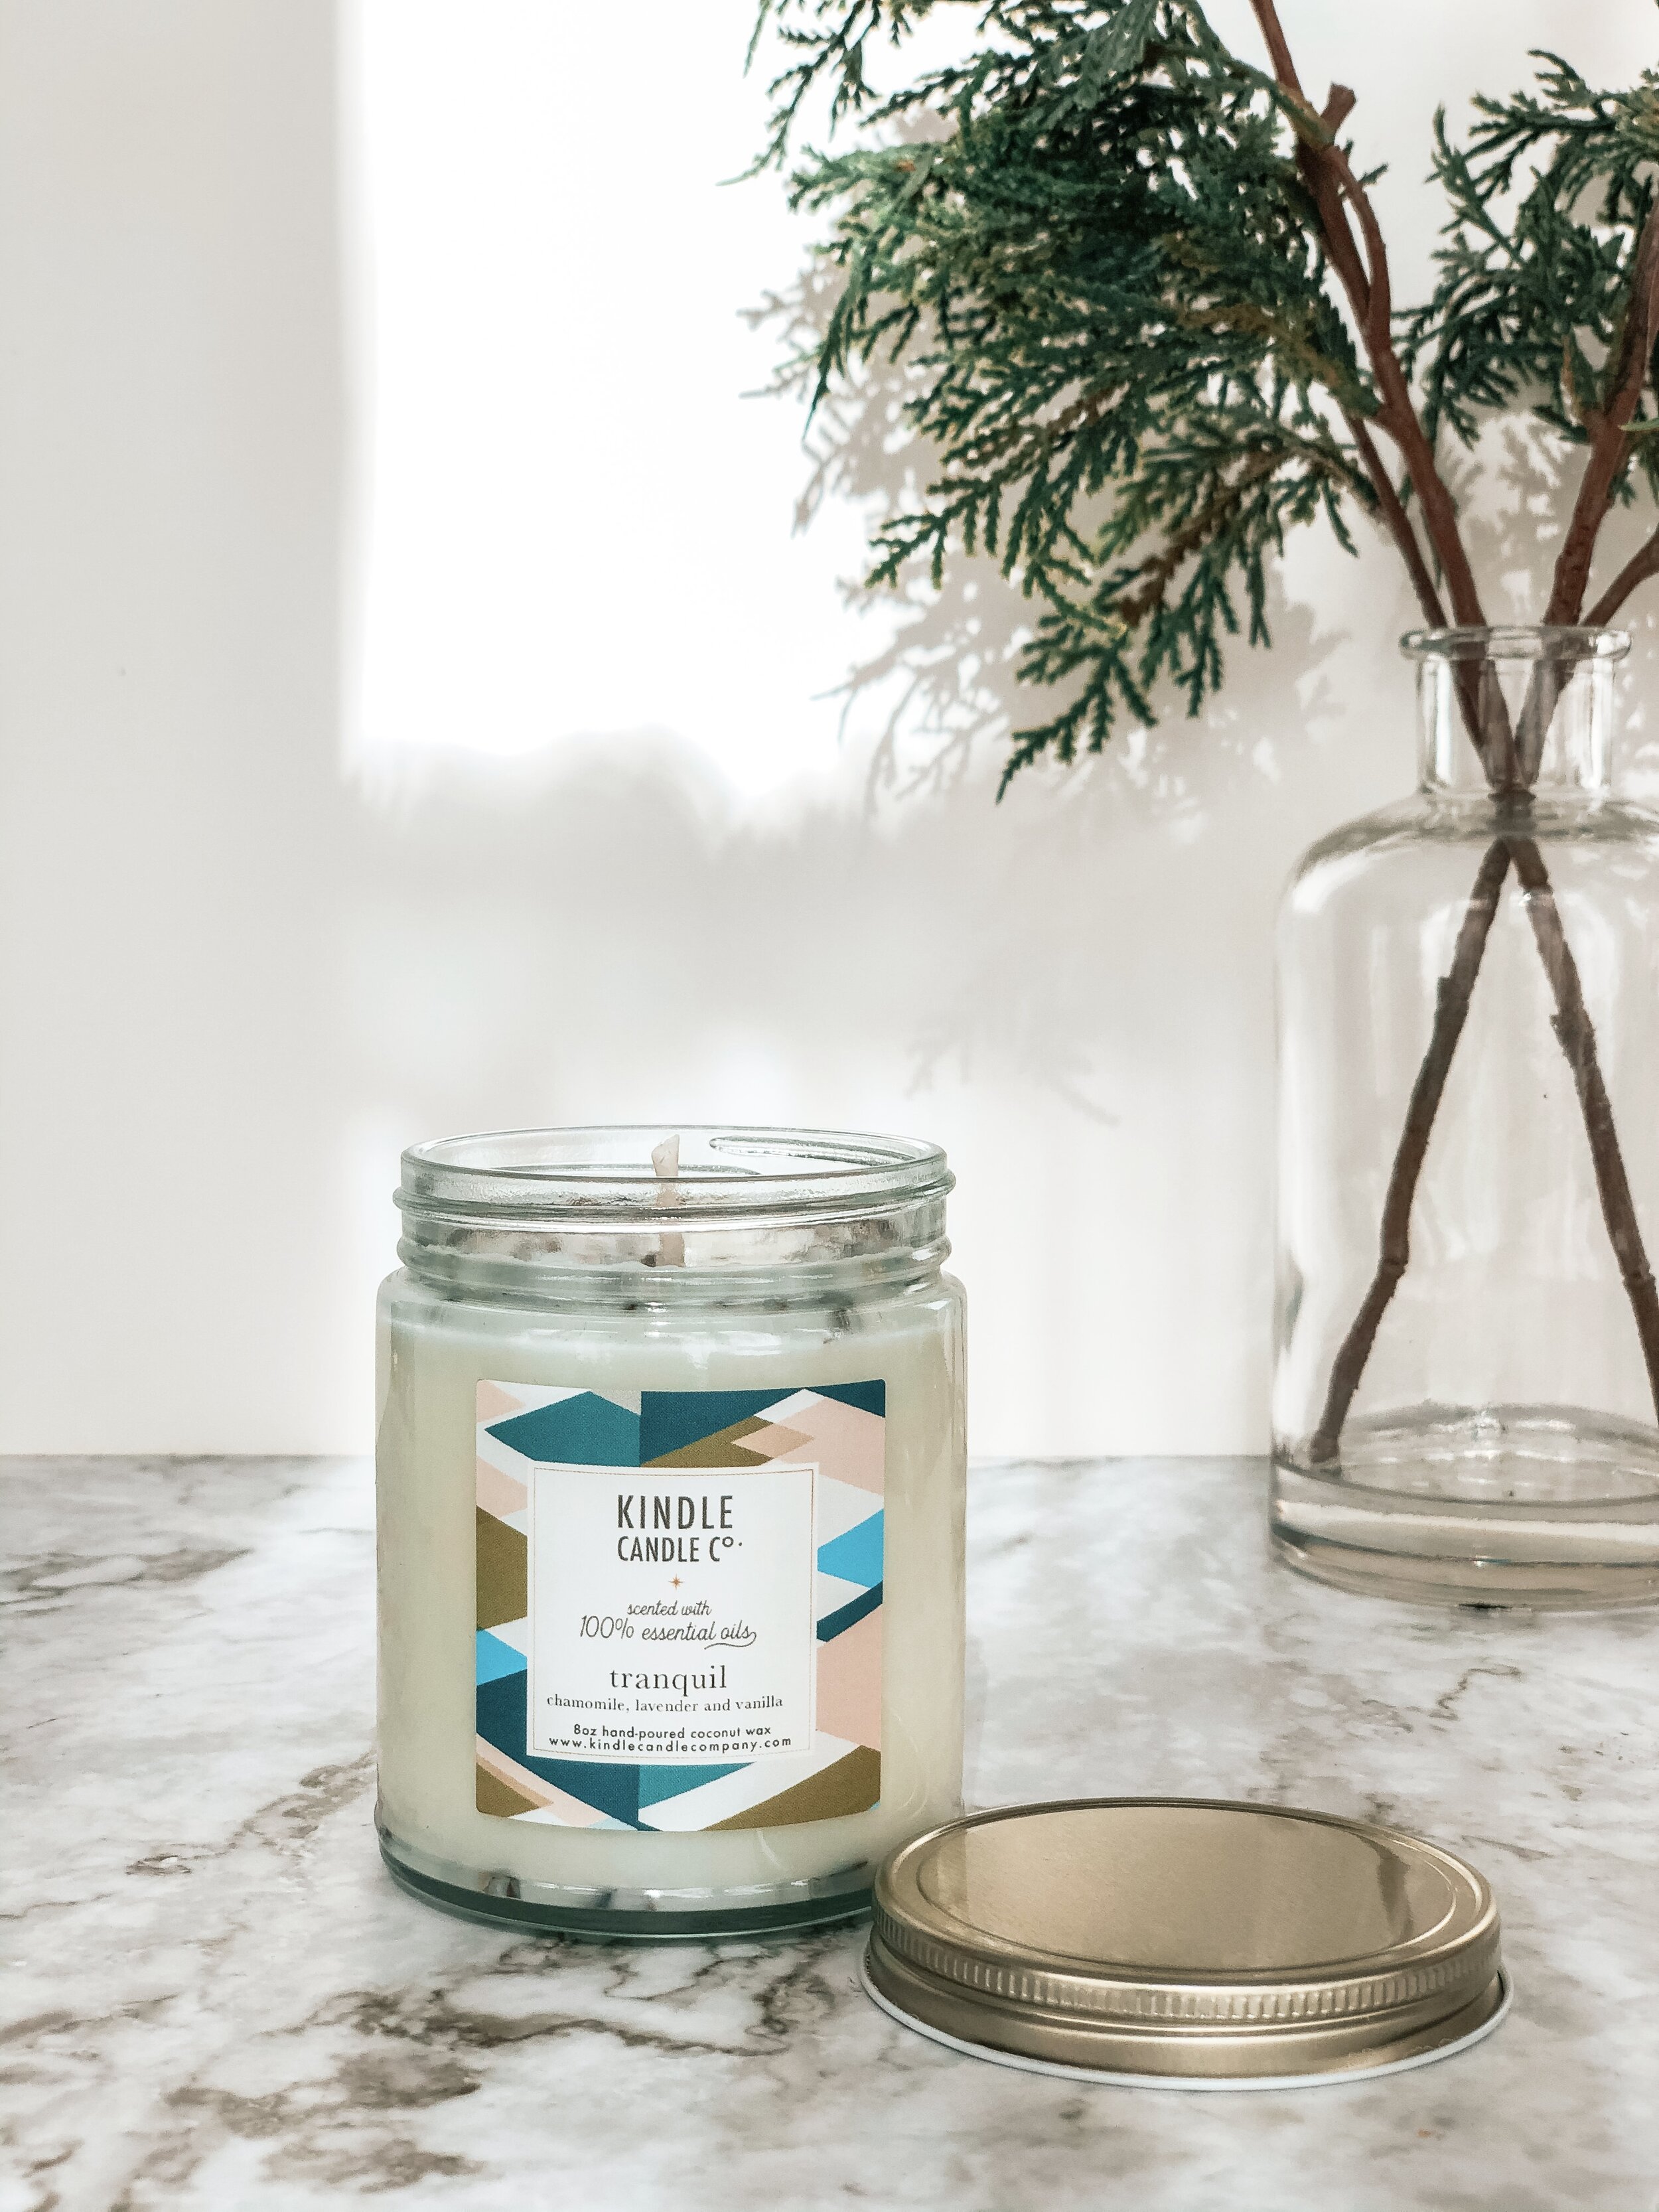 Tranquil: Lavender, Chamomile + vanilla essential oils — Kindle Candle Co.